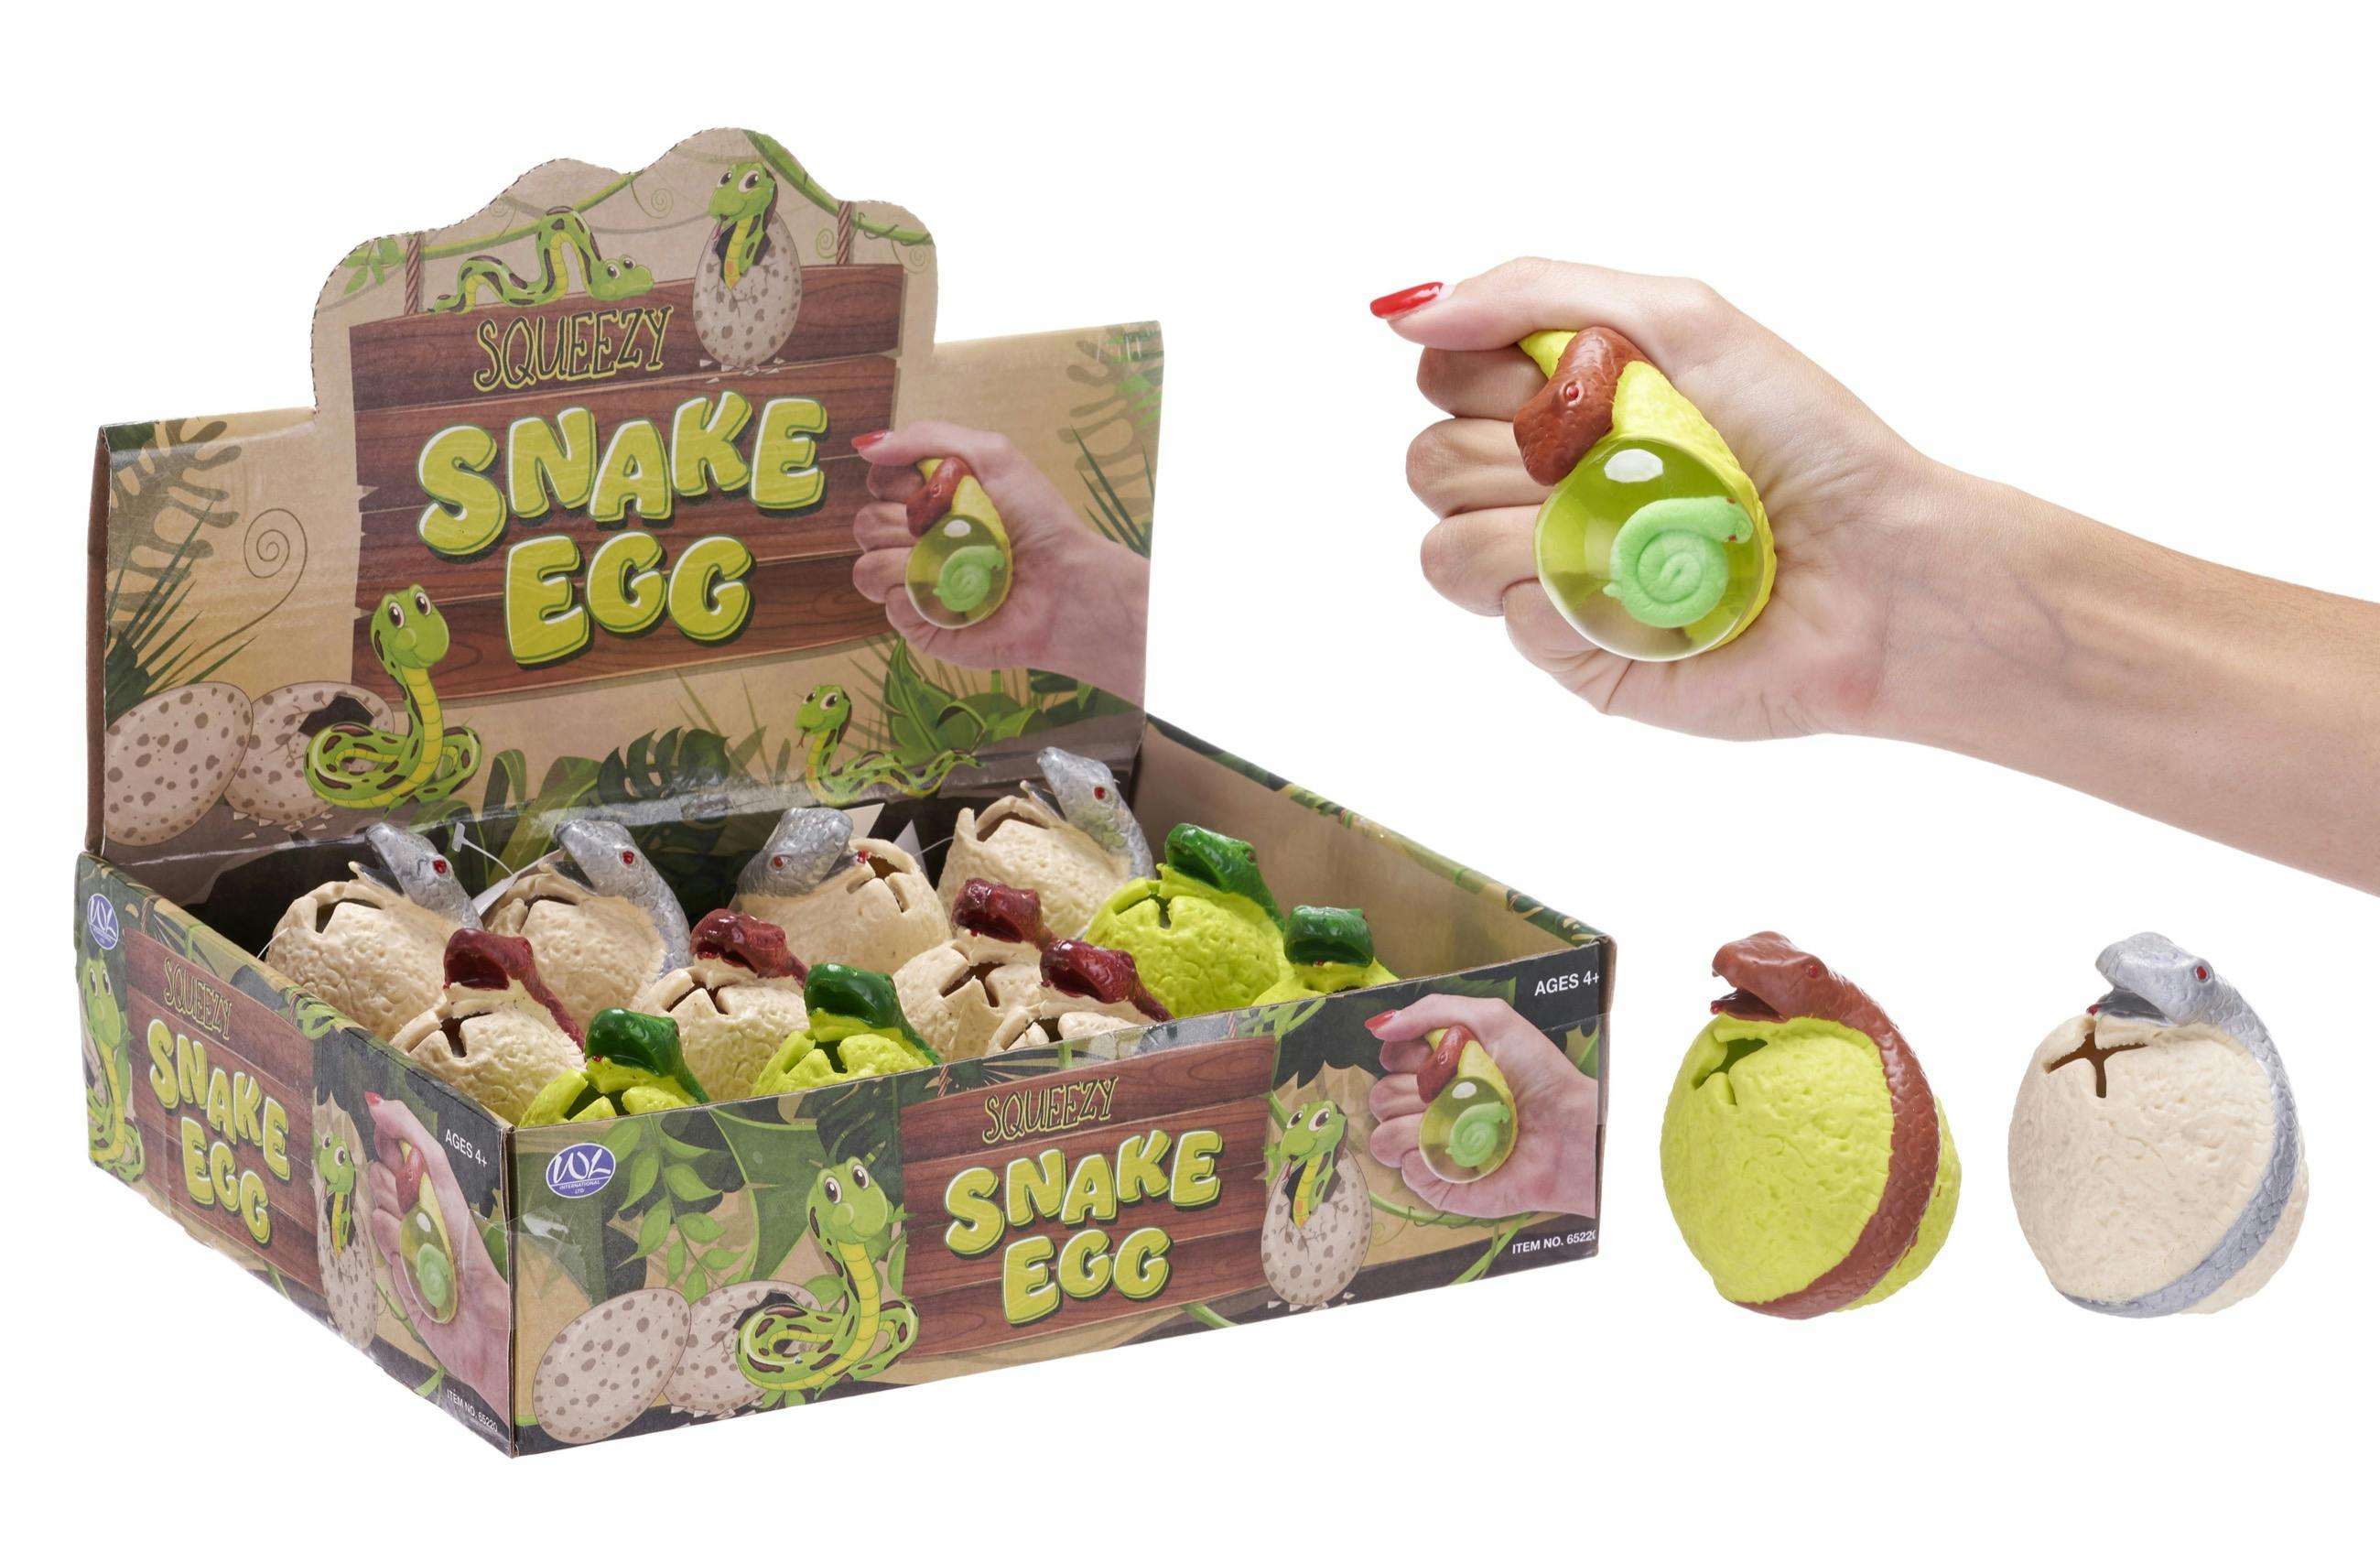 Product - Squeezy Snake Egg